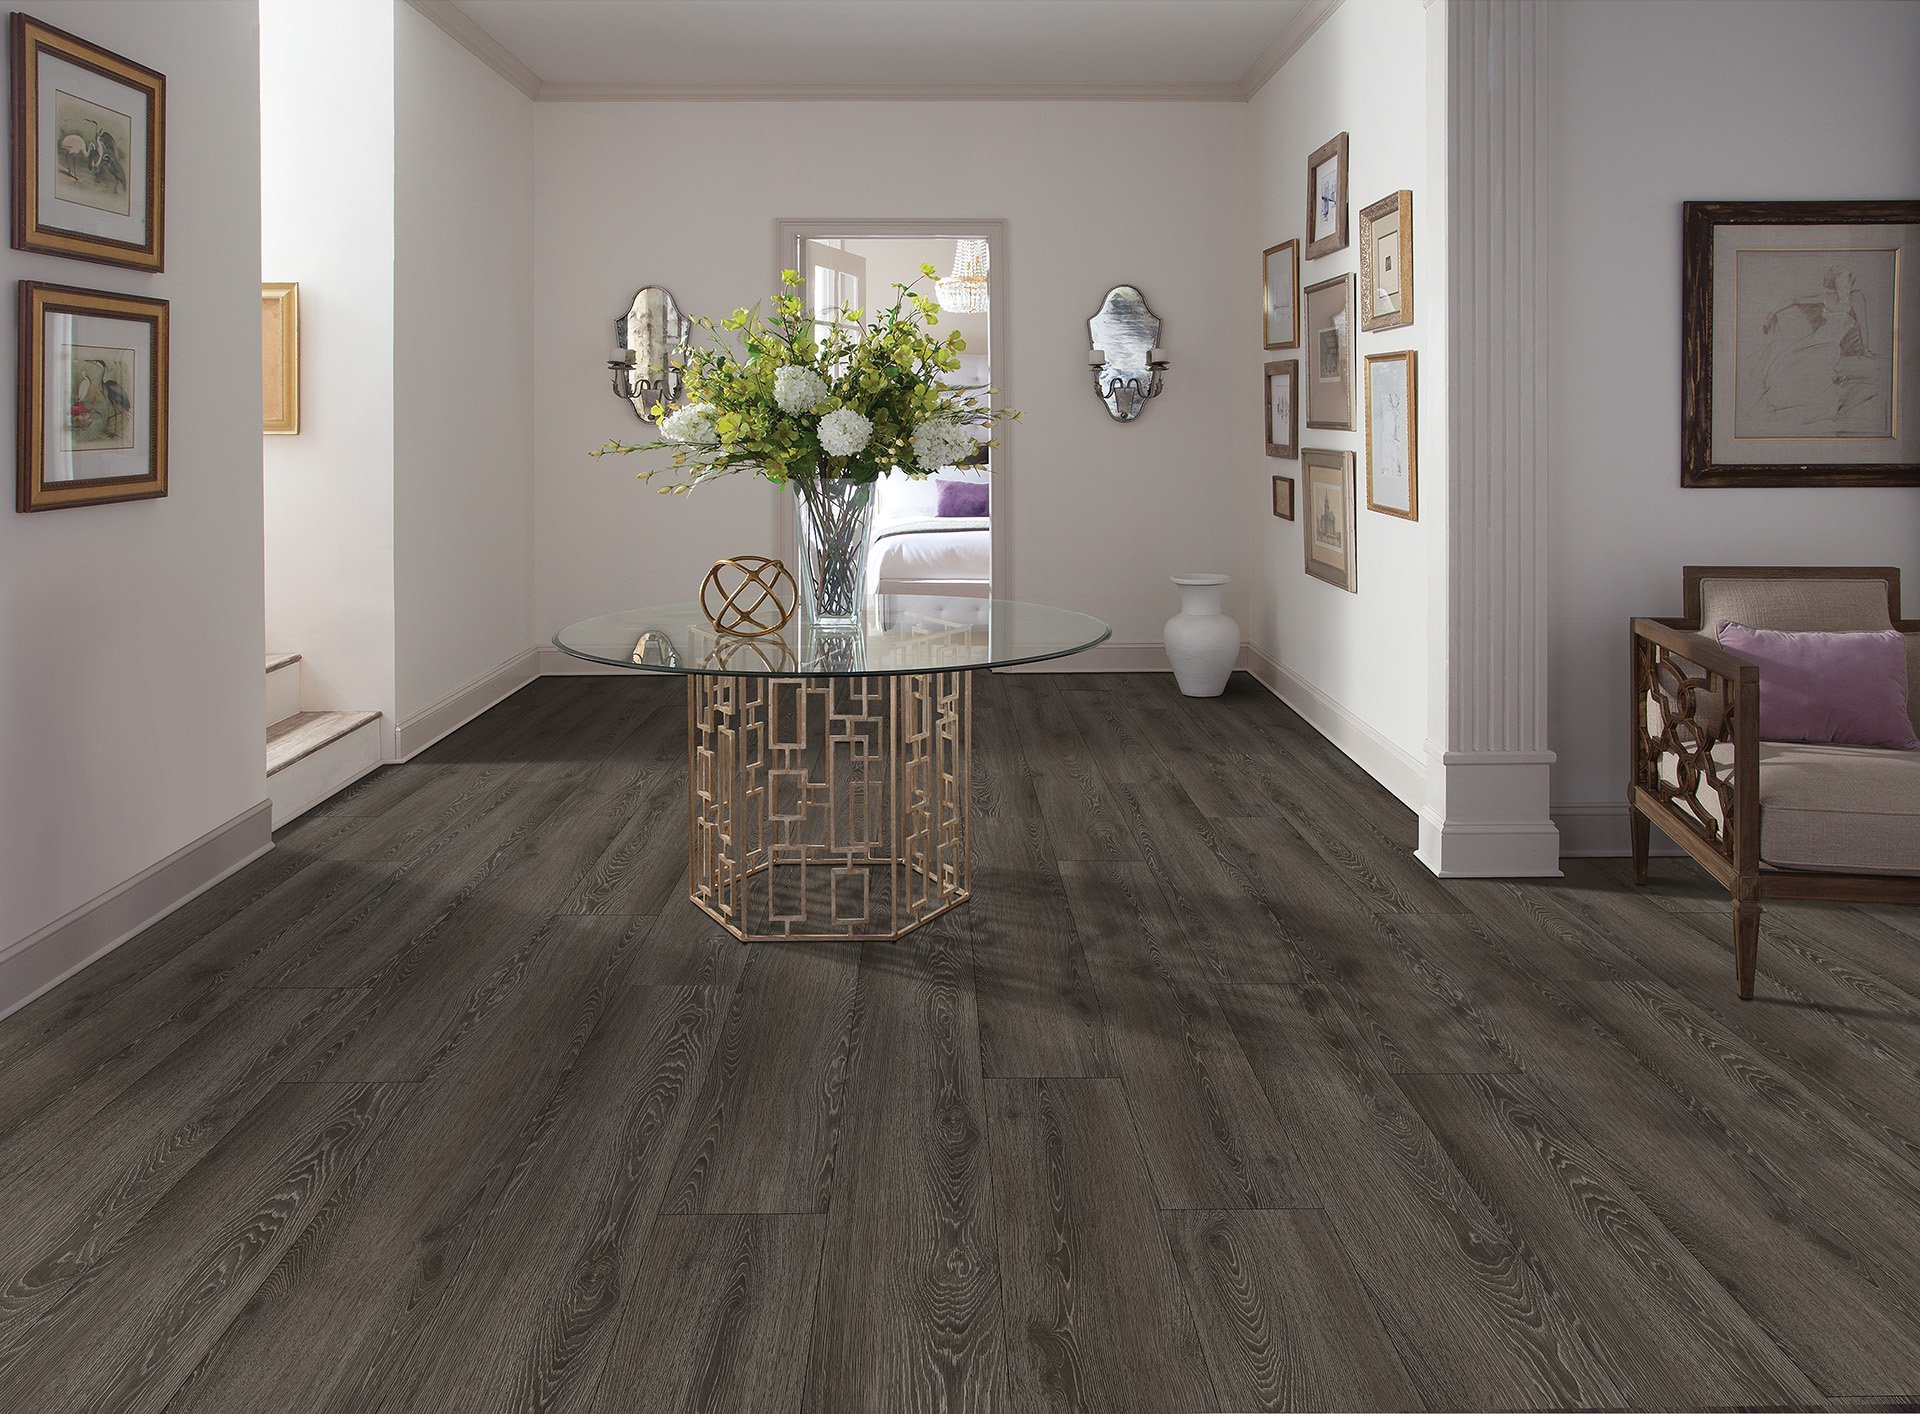 Why Is Luxury Vinyl Tile Flooring So Popular And Will It Work For You?